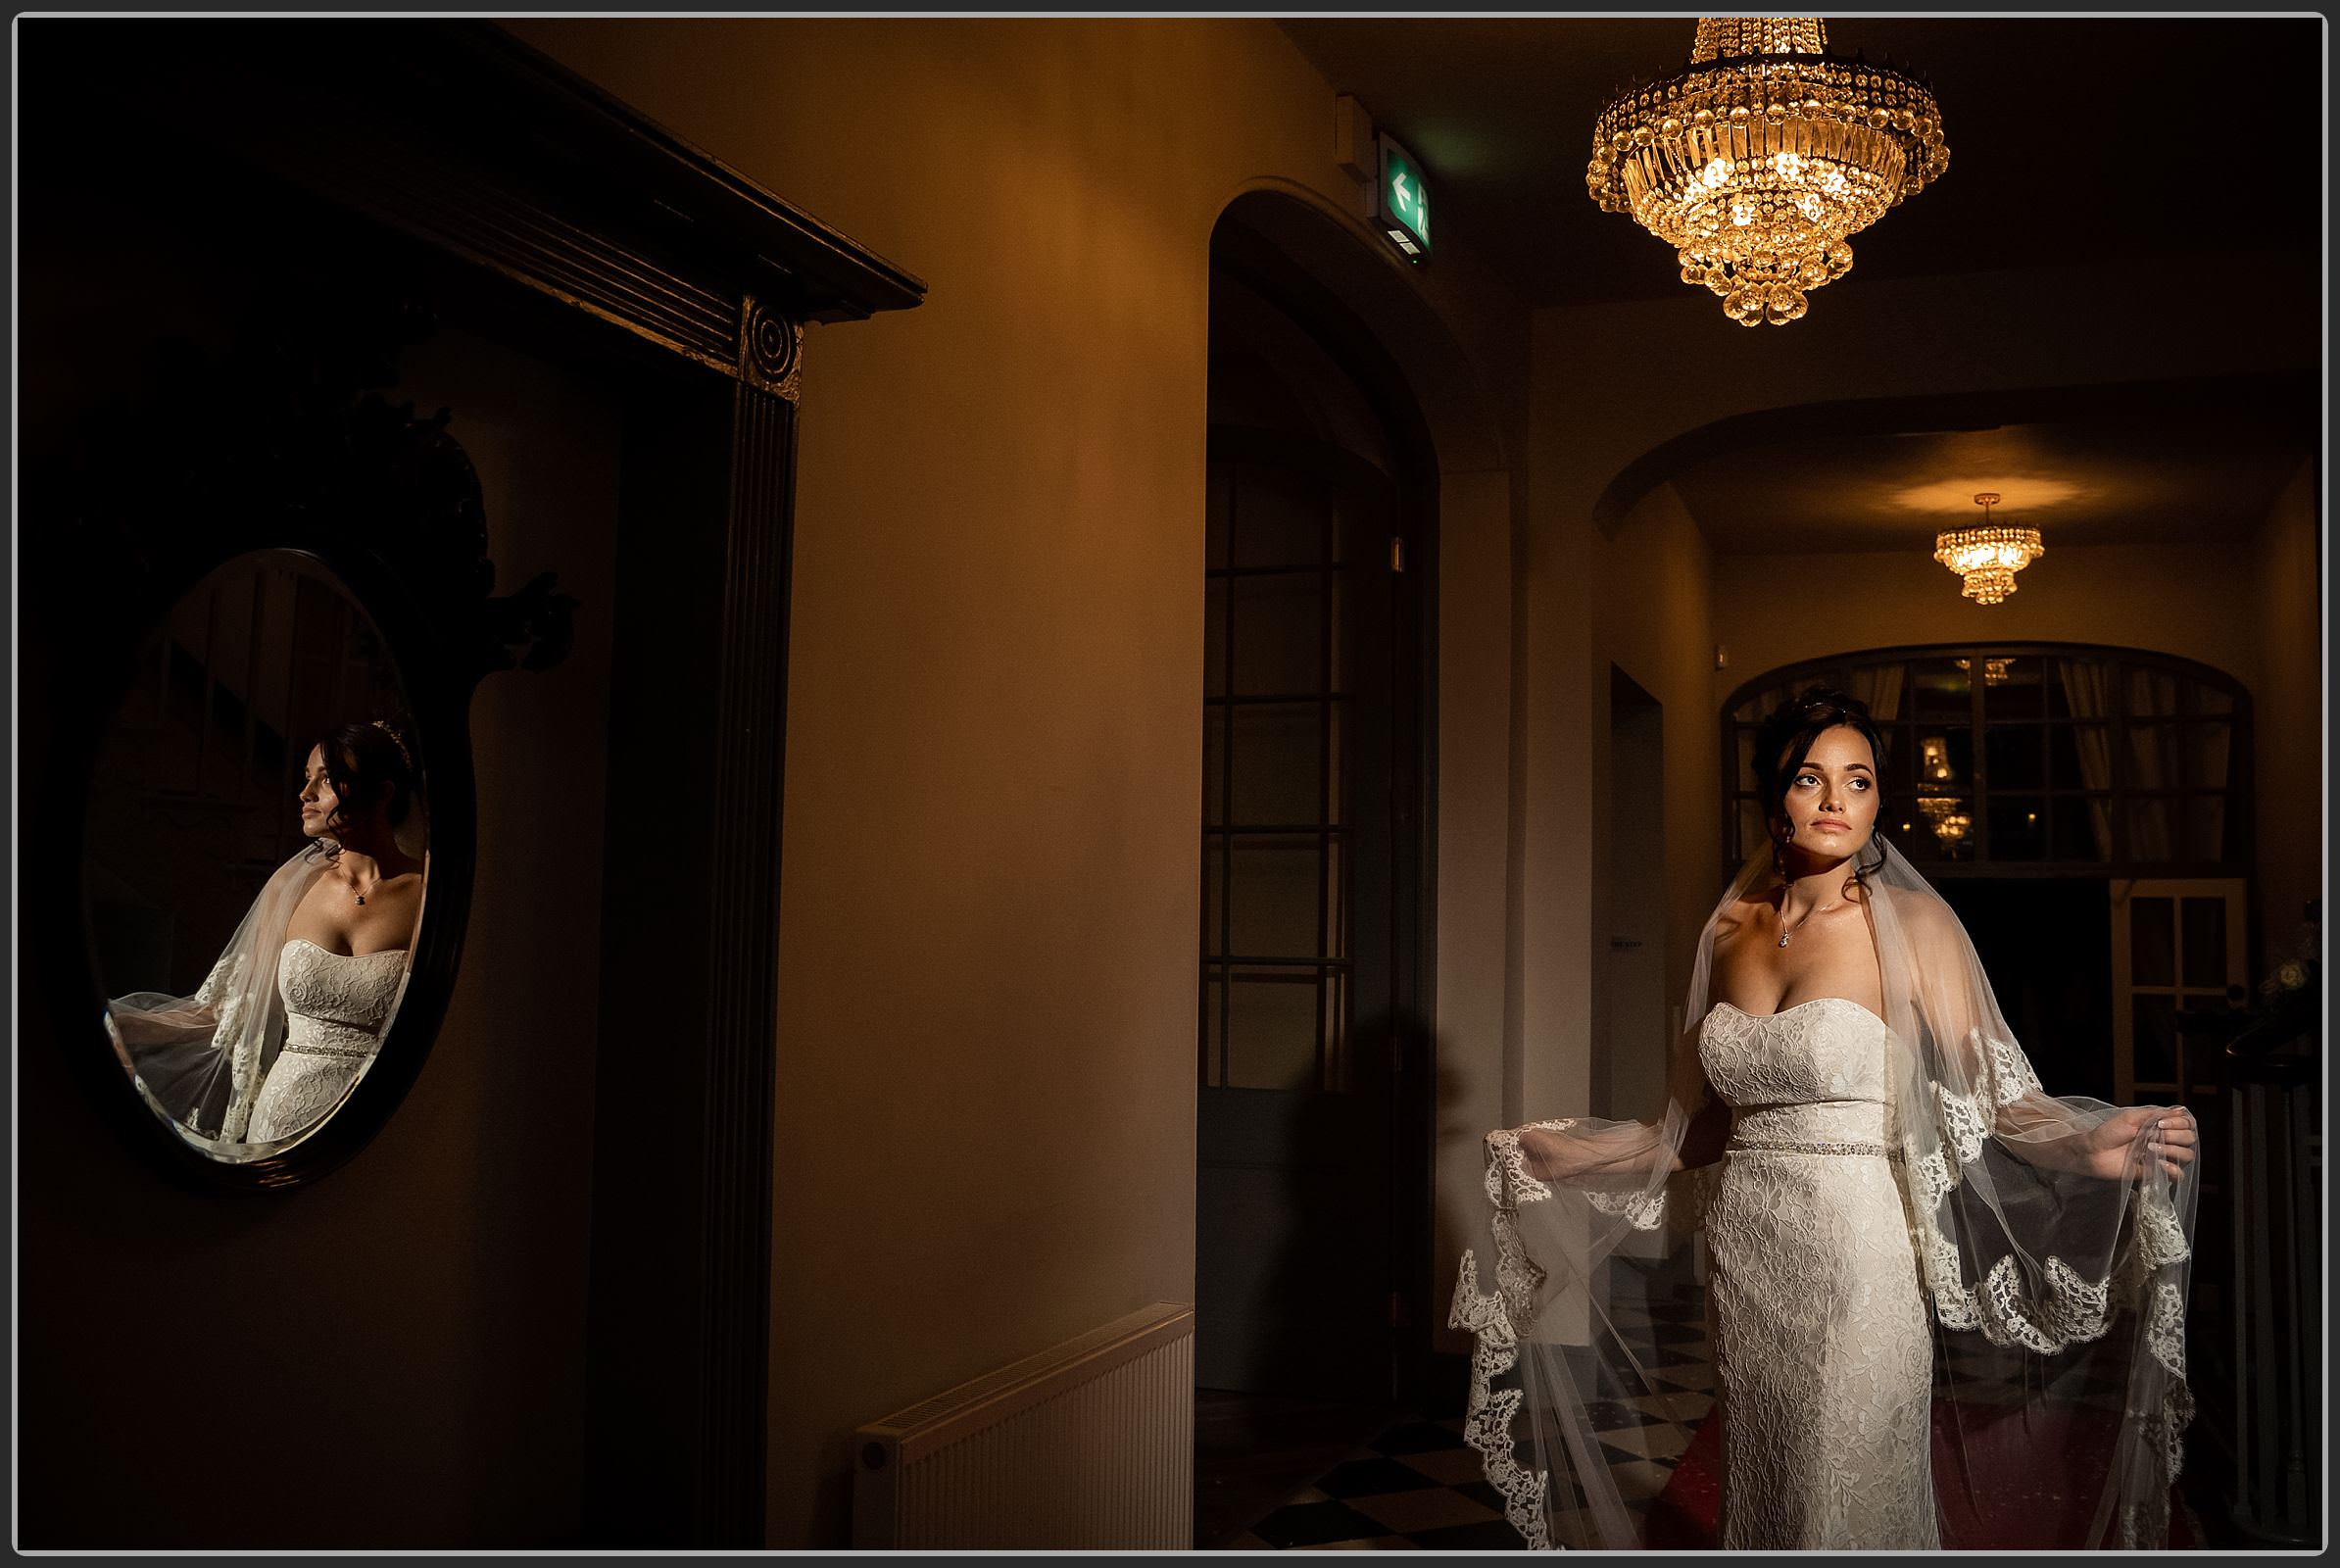 The Bride at Warwick House